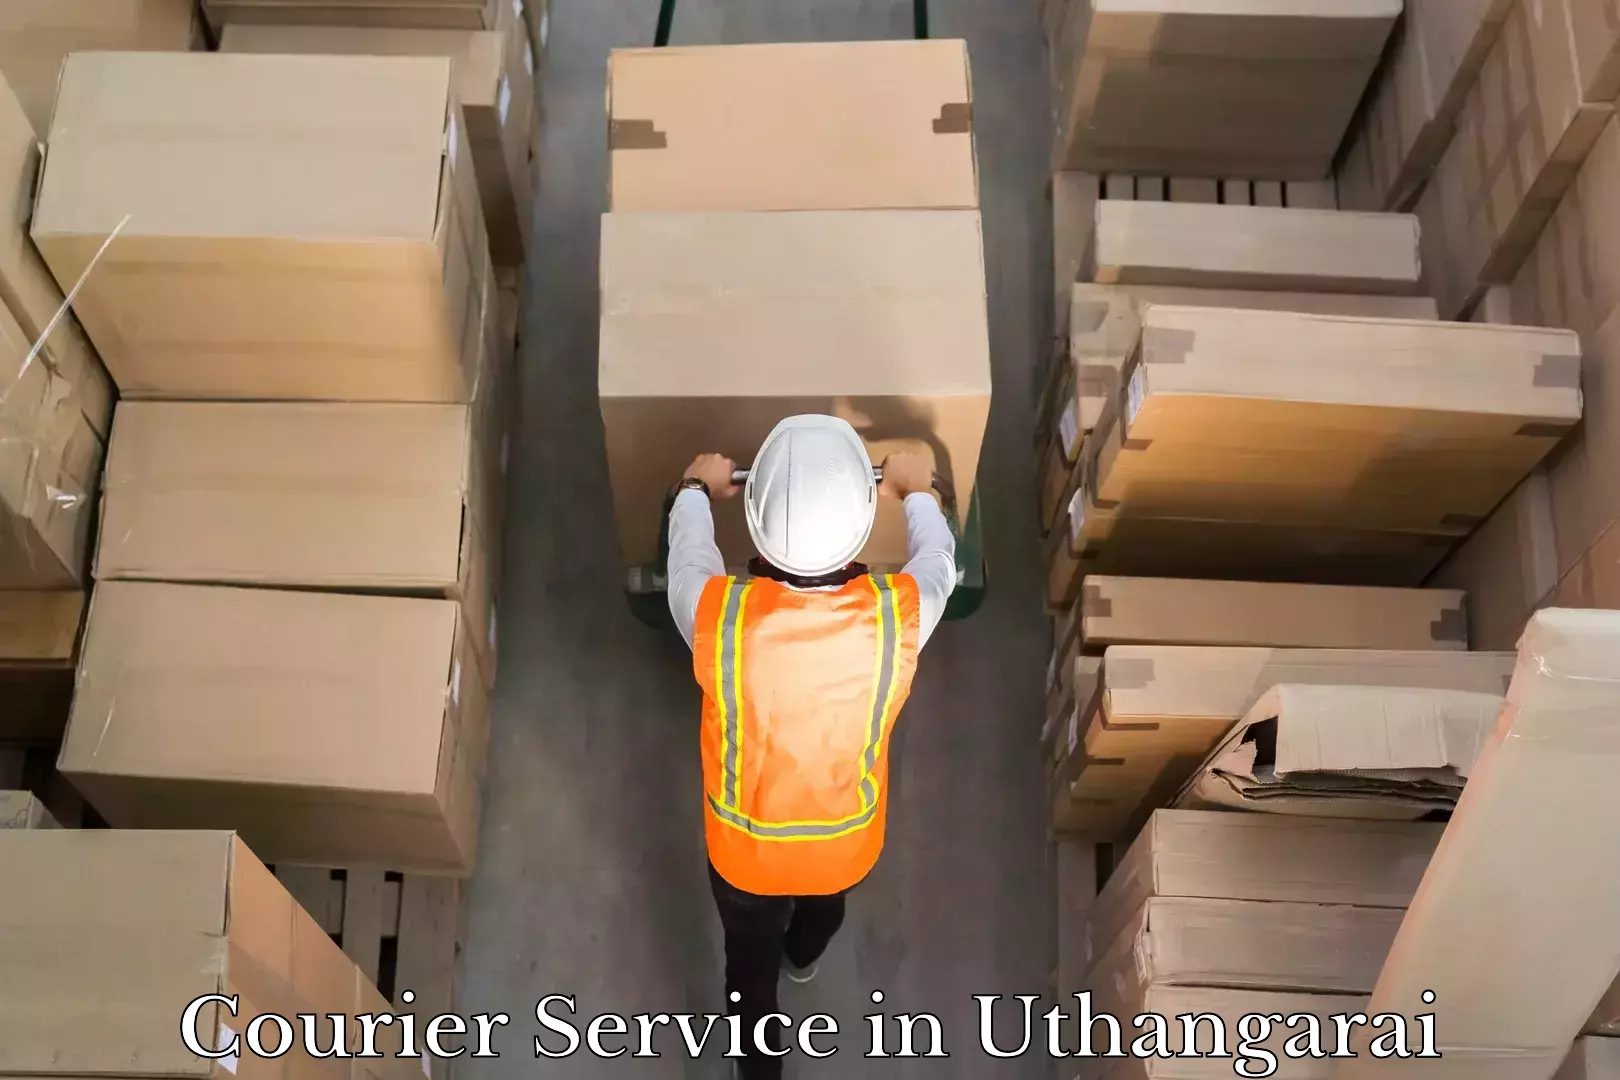 Courier dispatch services in Uthangarai